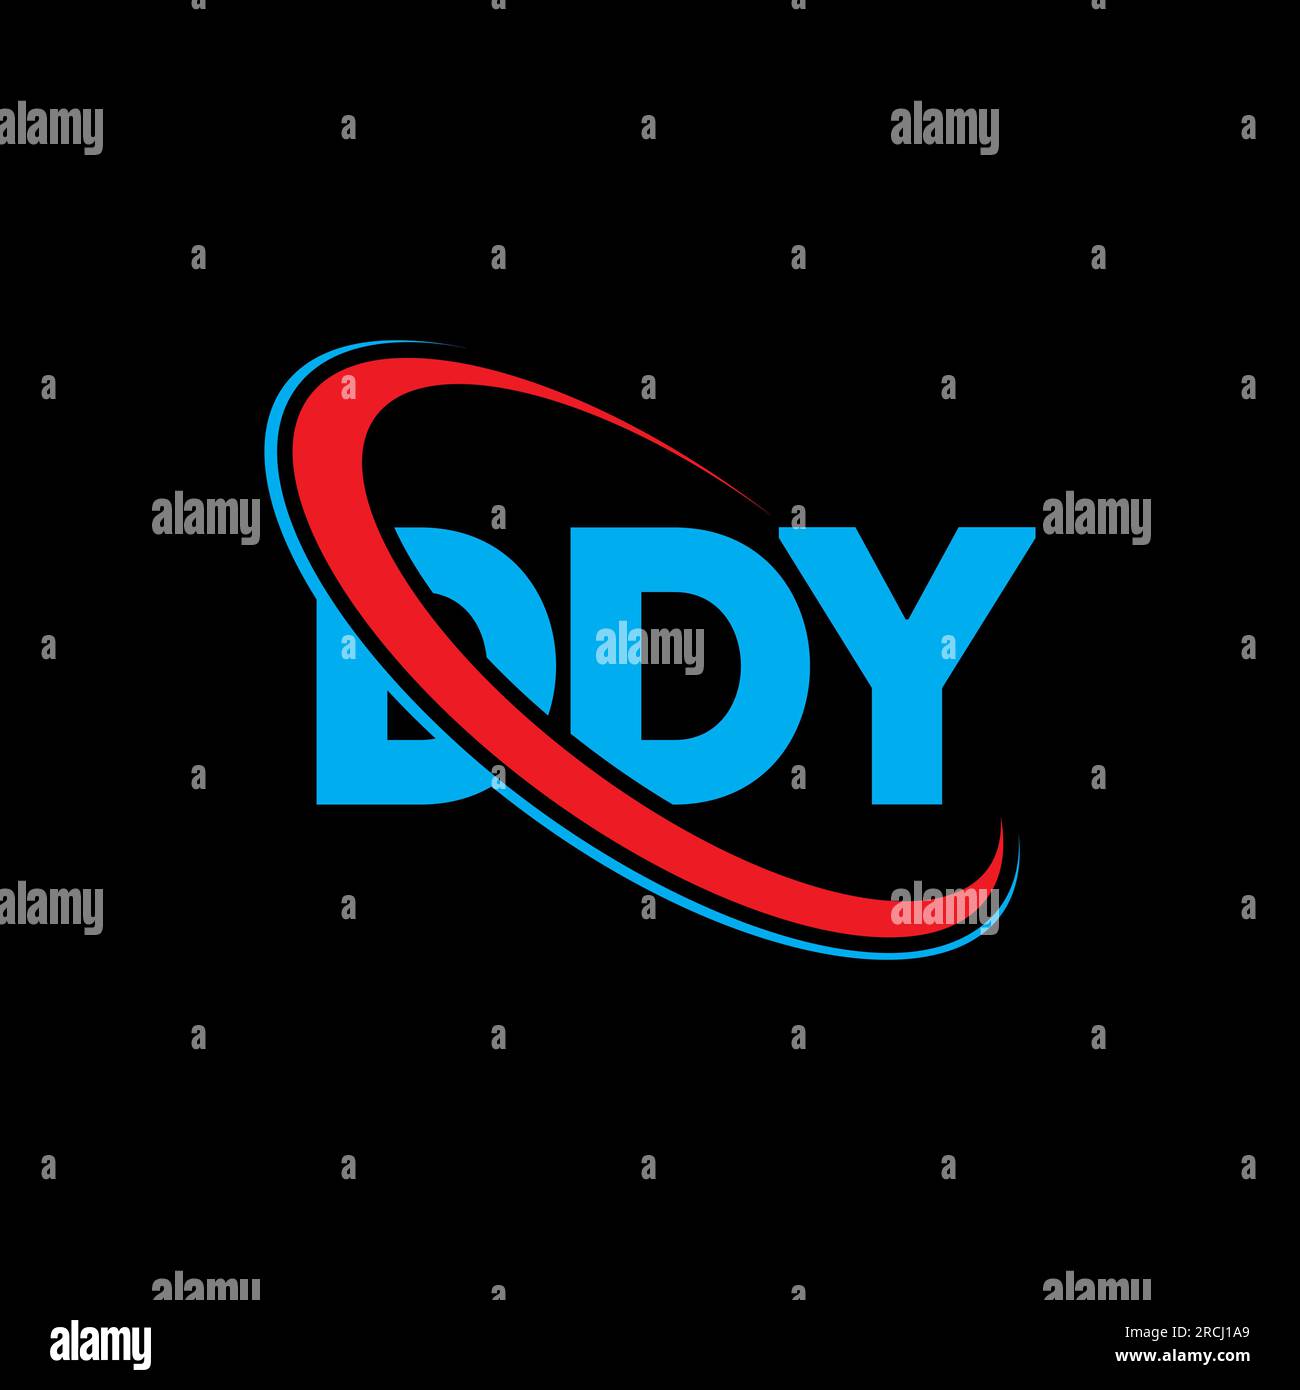 Ddy logo design Stock Vector Images - Alamy